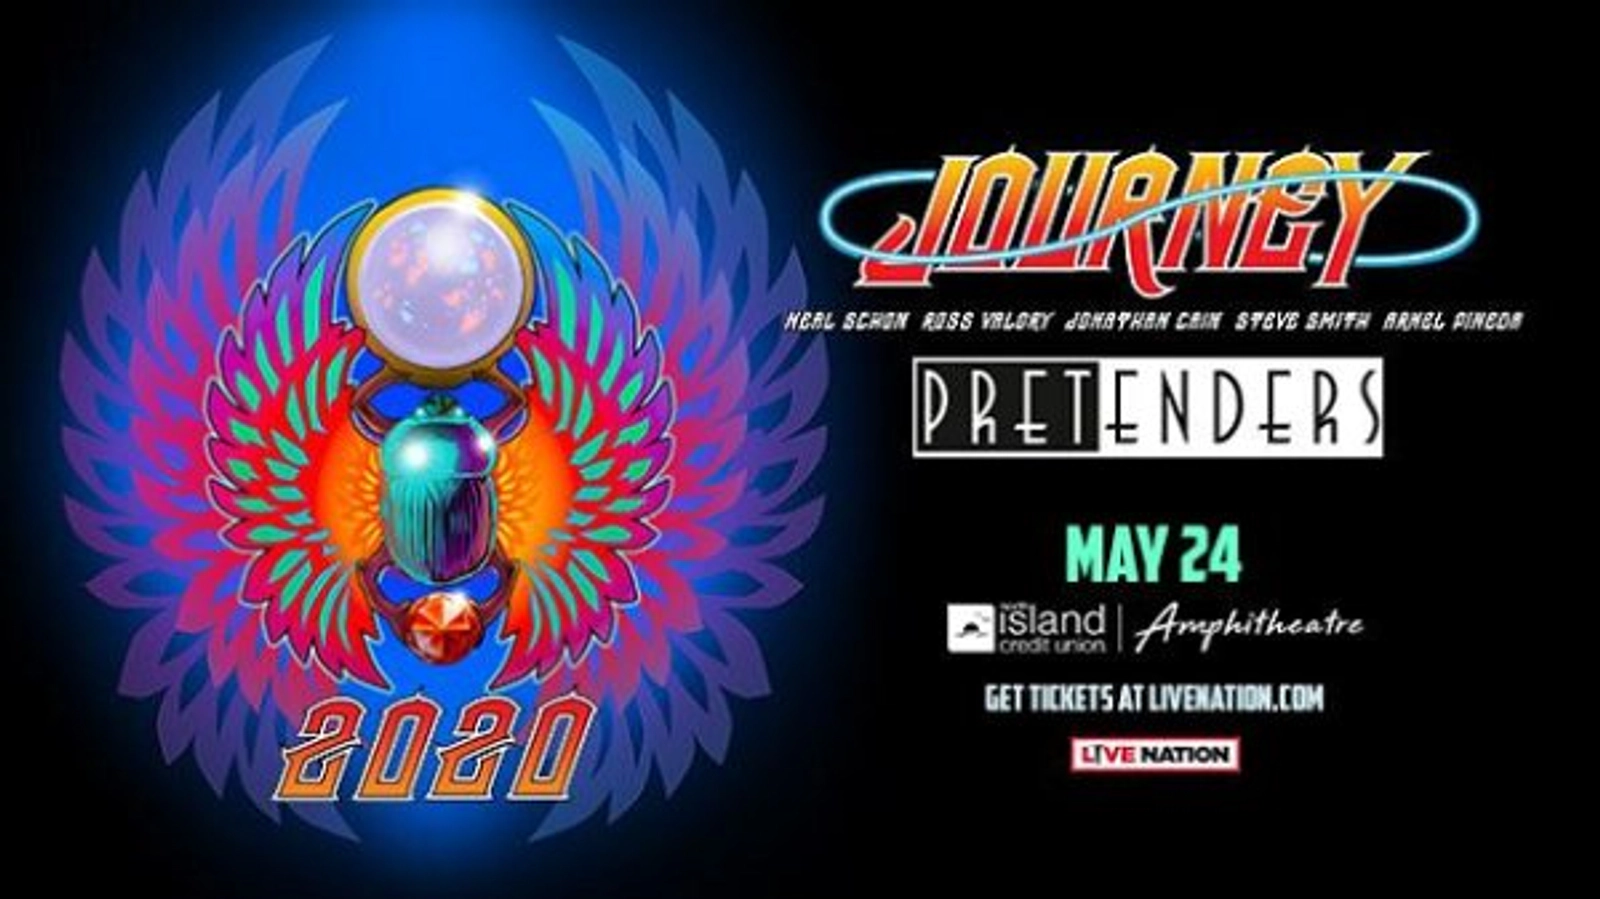 Win Journey & The Pretenders Tickets - Thumbnail Image